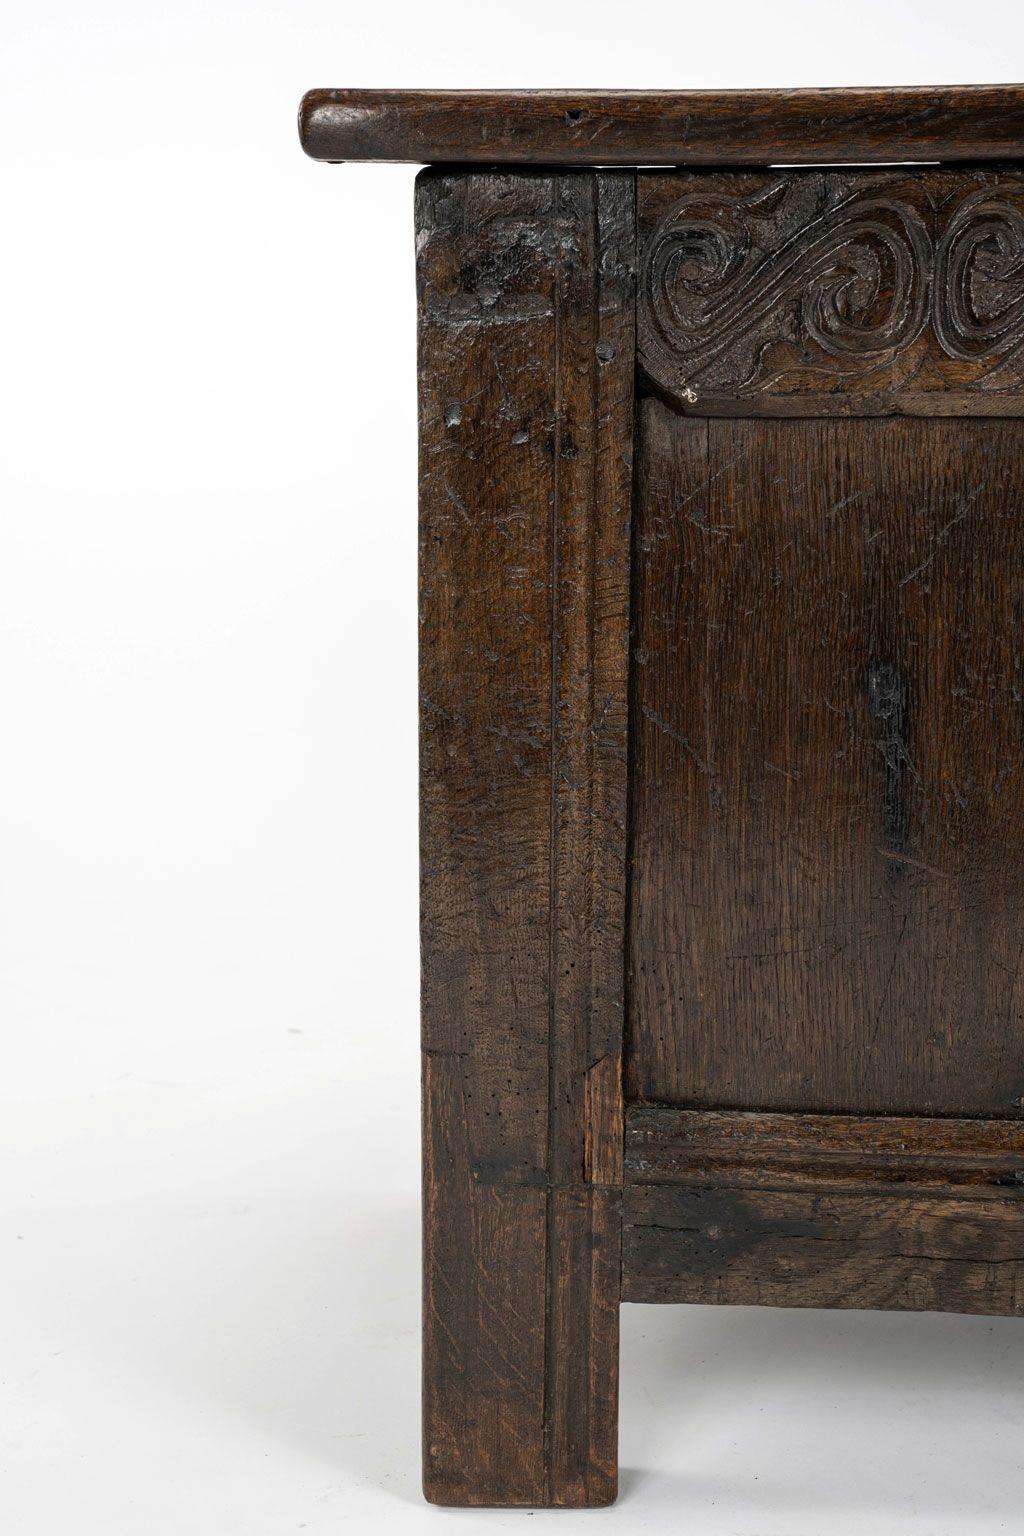 17th century joined oak triple panel top coffer with hinged triple panel top. Hand-carved decoration adorns front rail and front. Suitable to function as a table or seat, as well as for storage. Perfect to place at the foot of a bed or sitting under